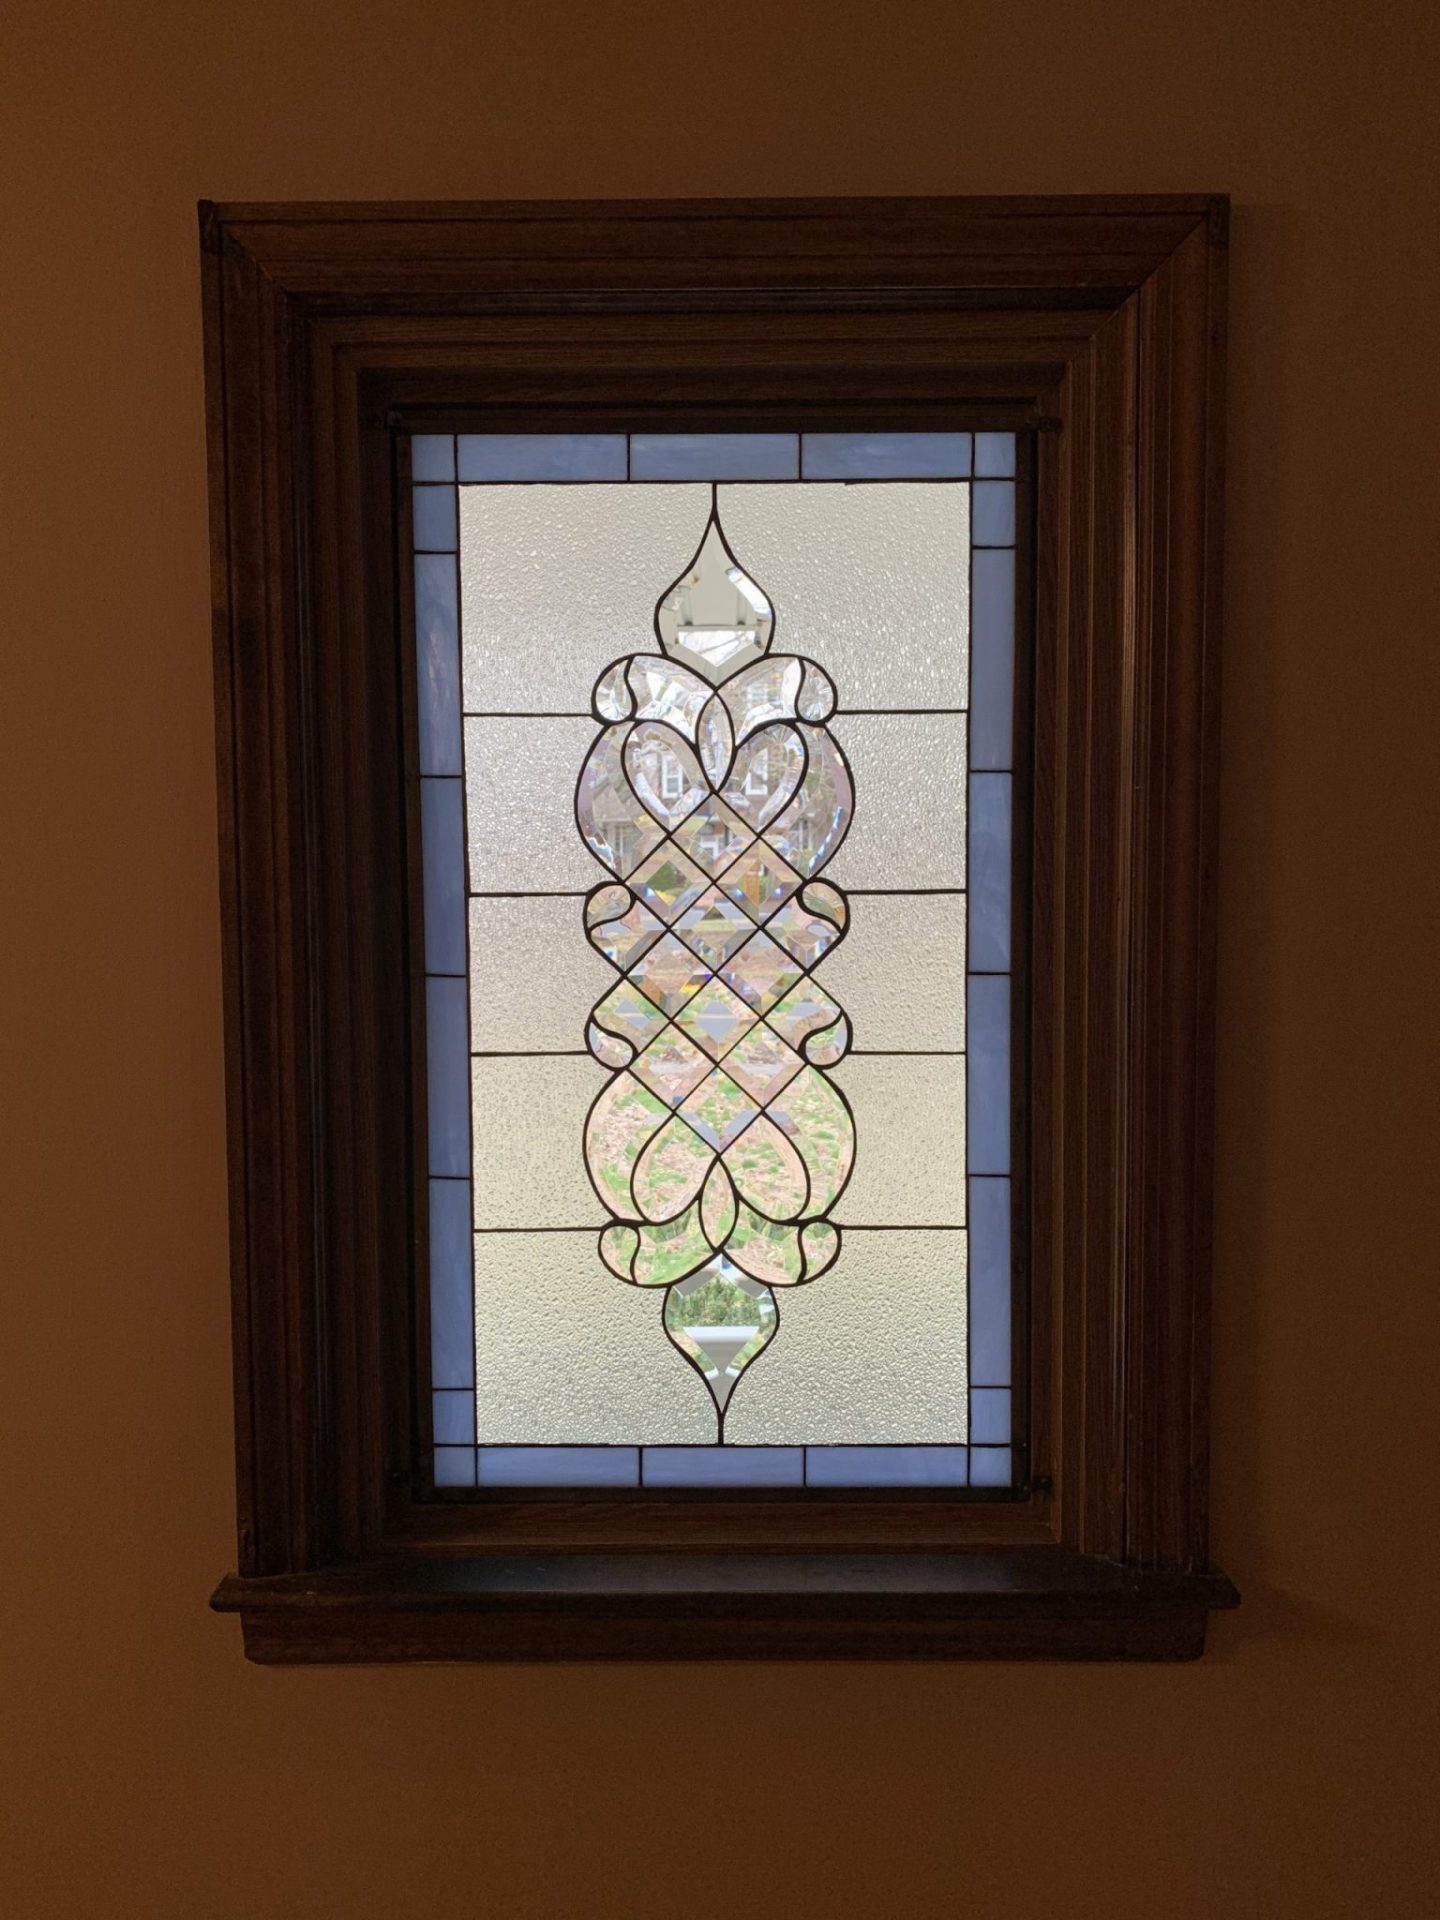 The "Laguna Stained & Beveled Window" installed in a wood frame by our client